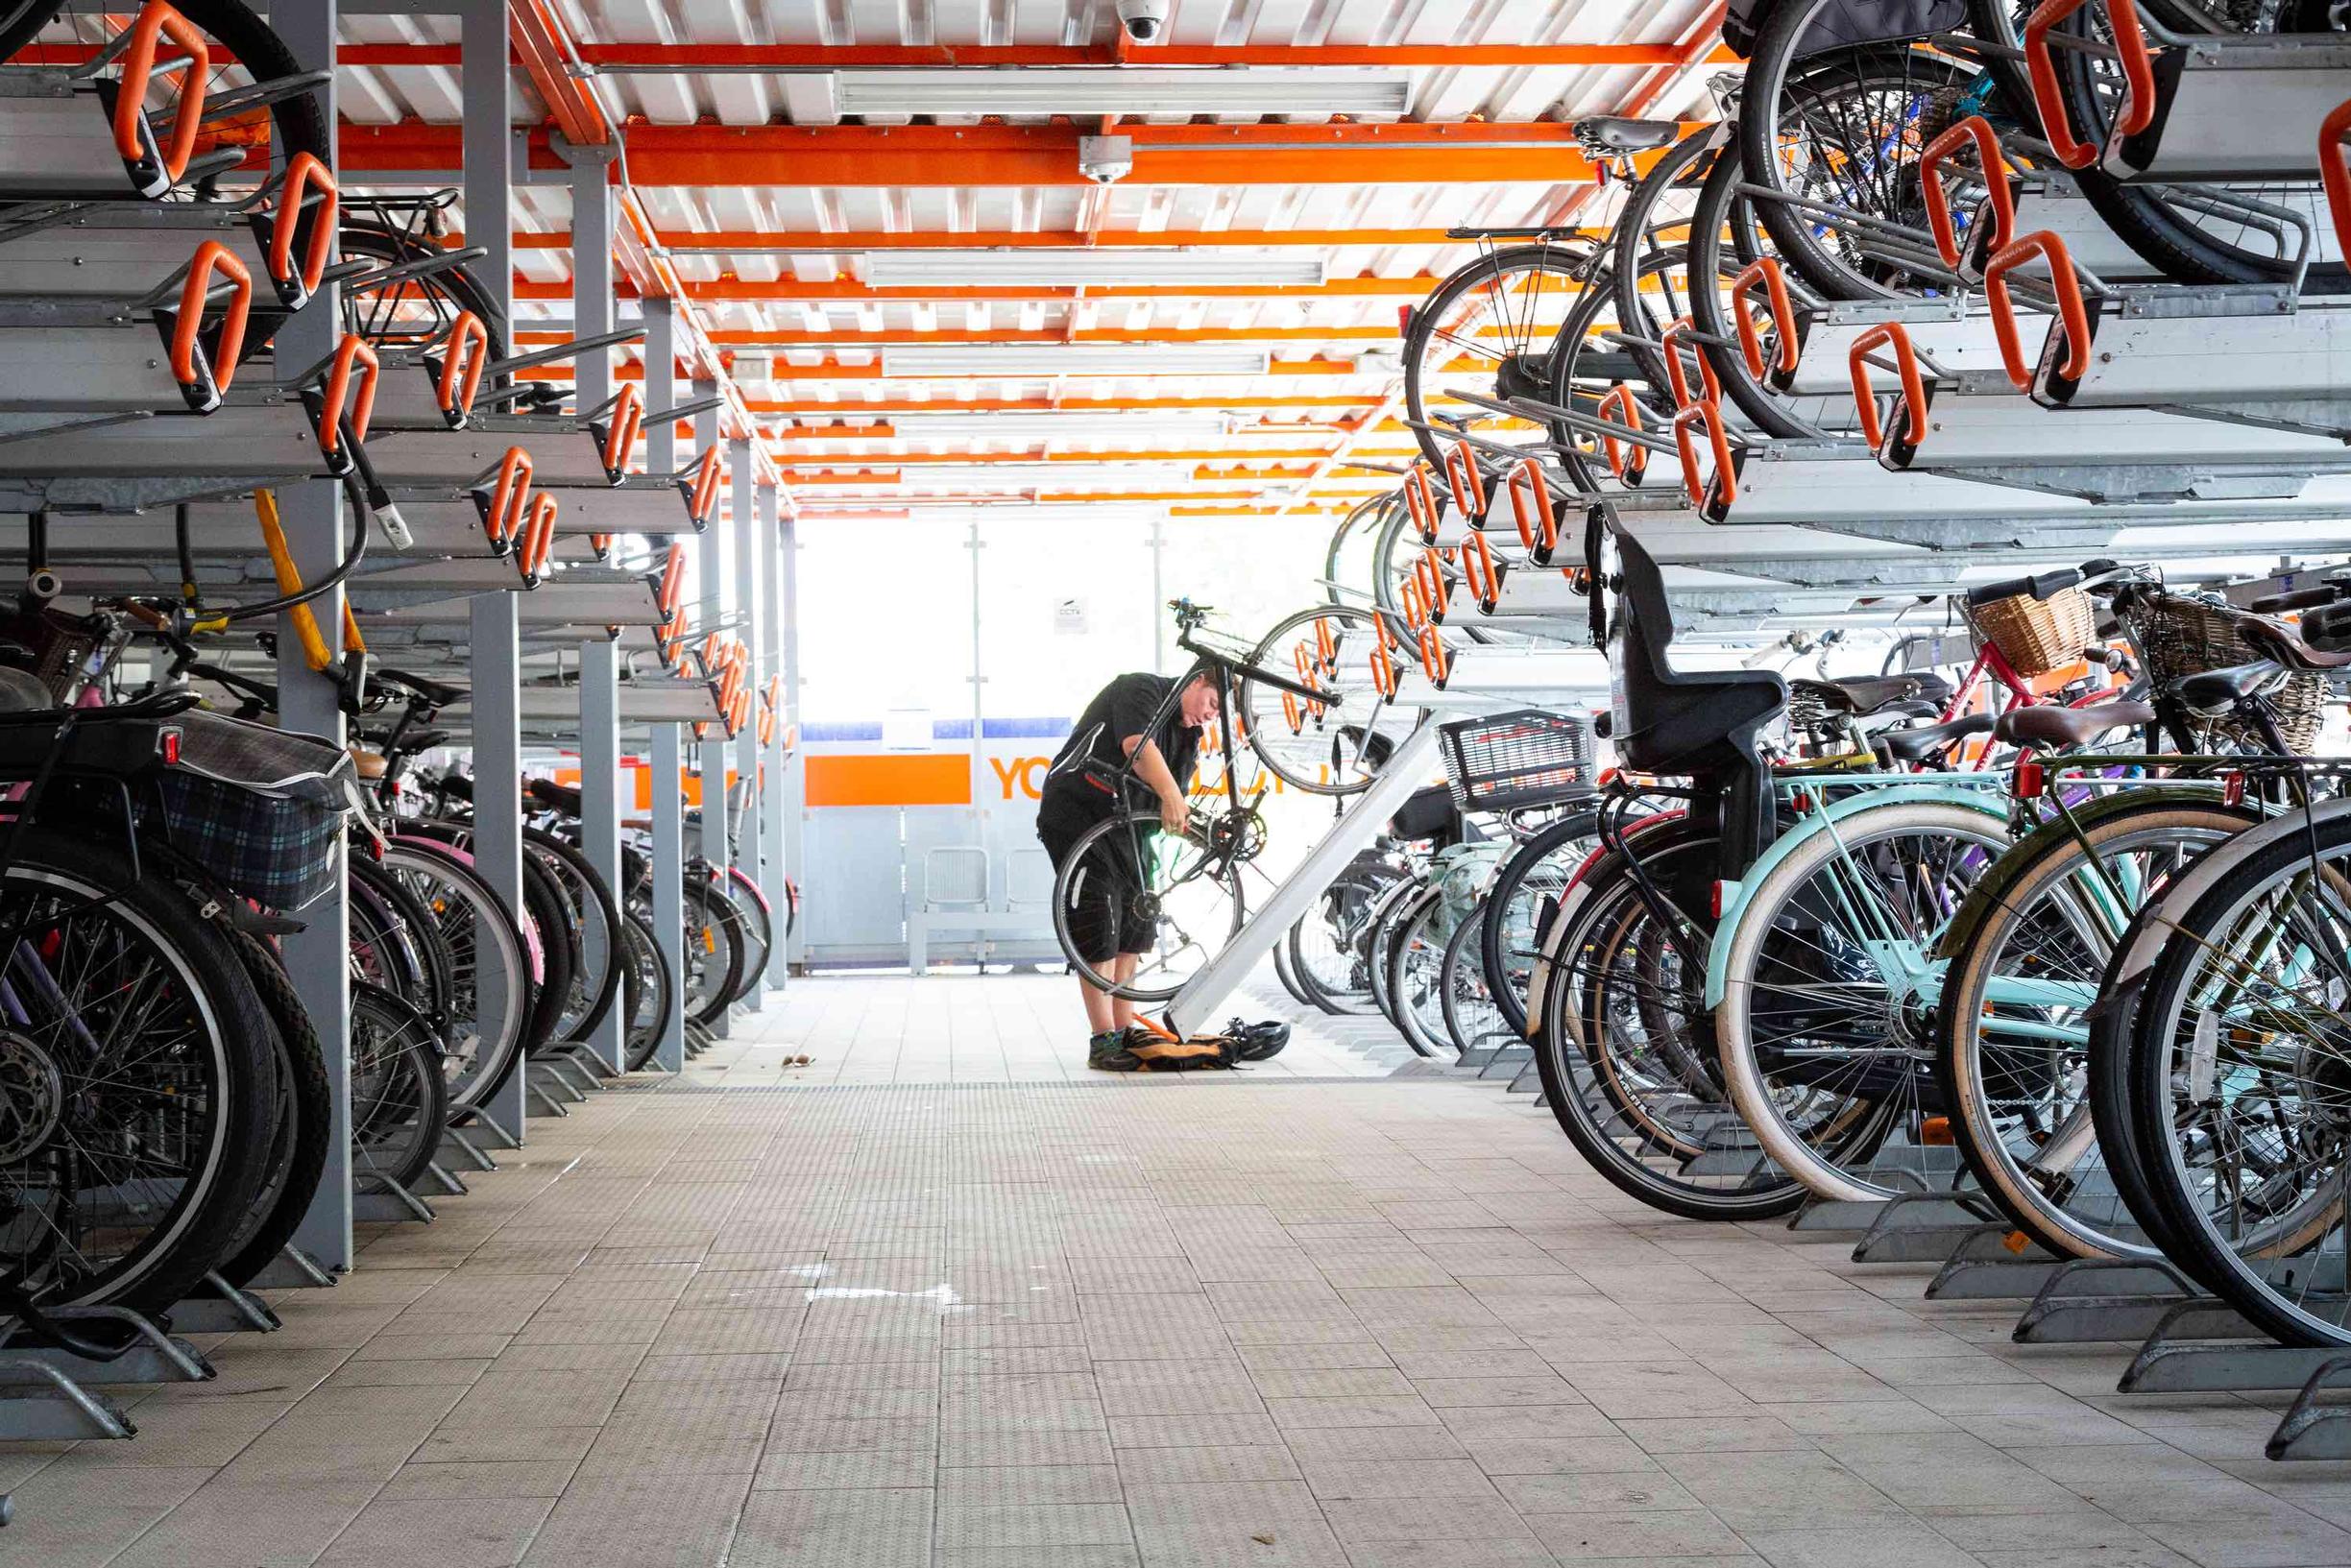 A cycle hub is to be built at Hackney Central Overground station